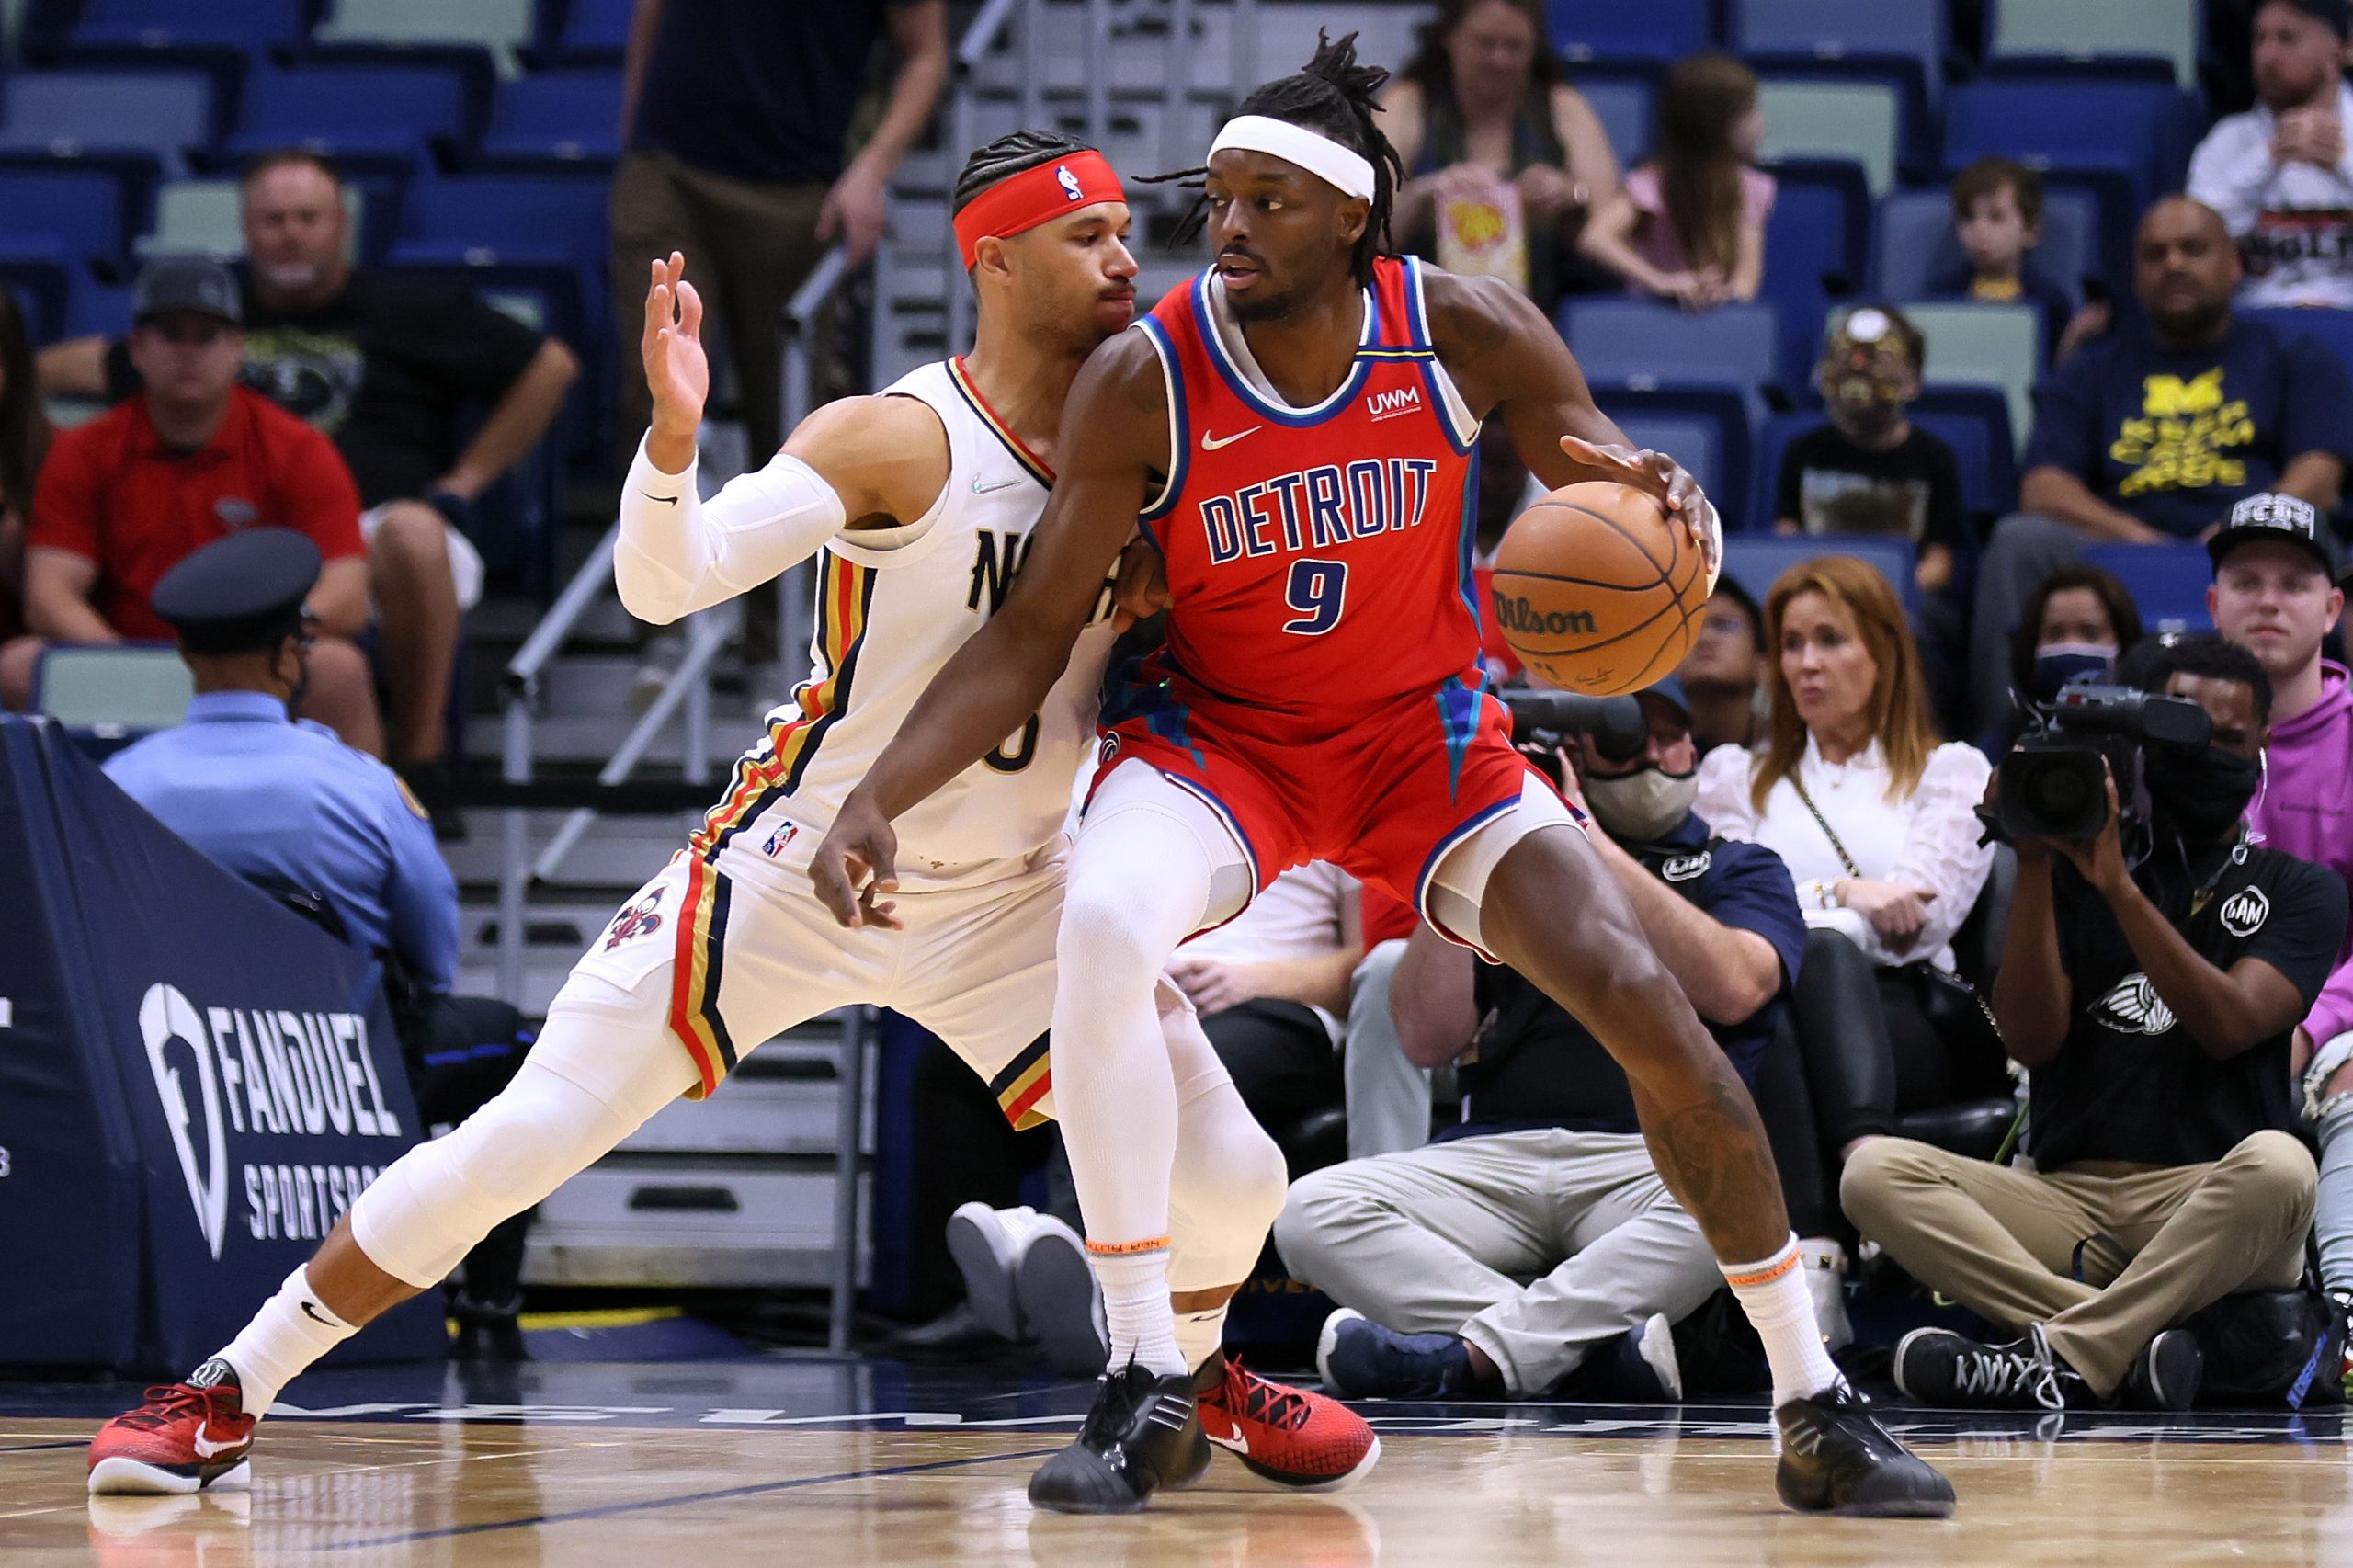 NBA Trade Deadline: Jerami Grant Earns Praise From Detroit Pistons for Handling Trade Rumors, but He Could Be Elsewhere Soon